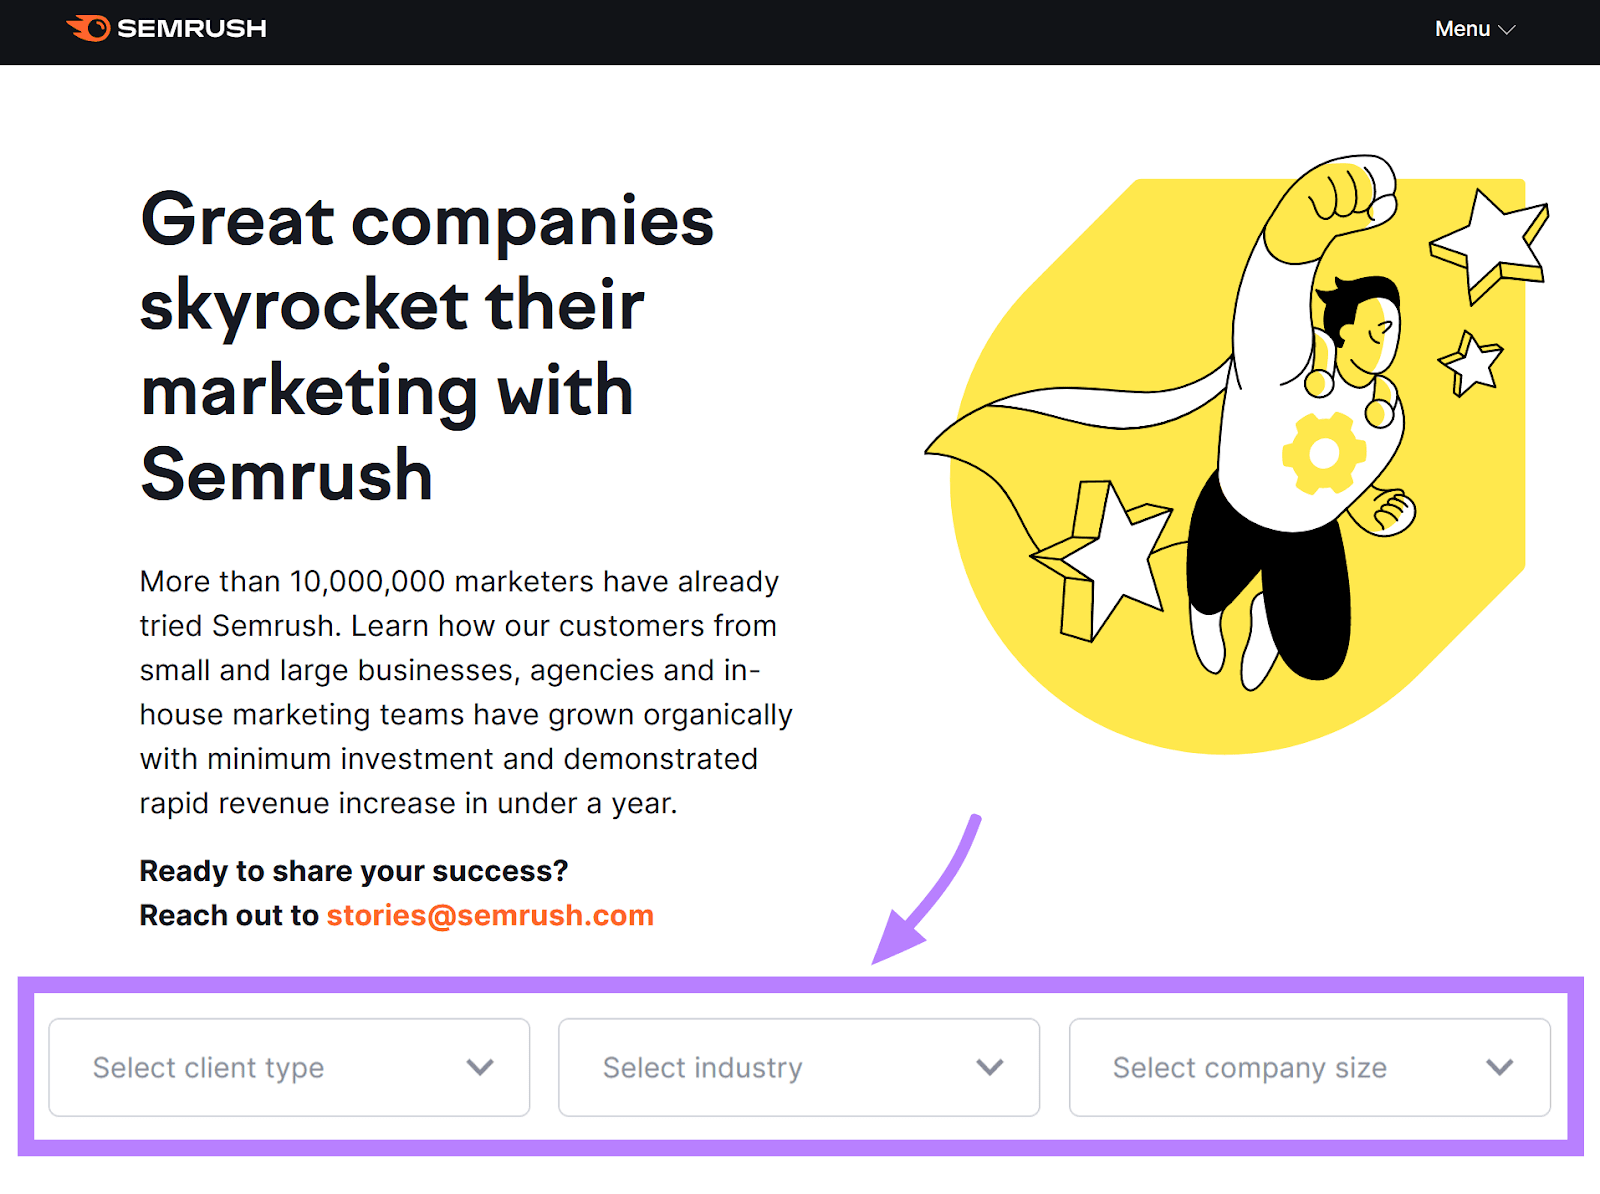 success stories page by Semrush